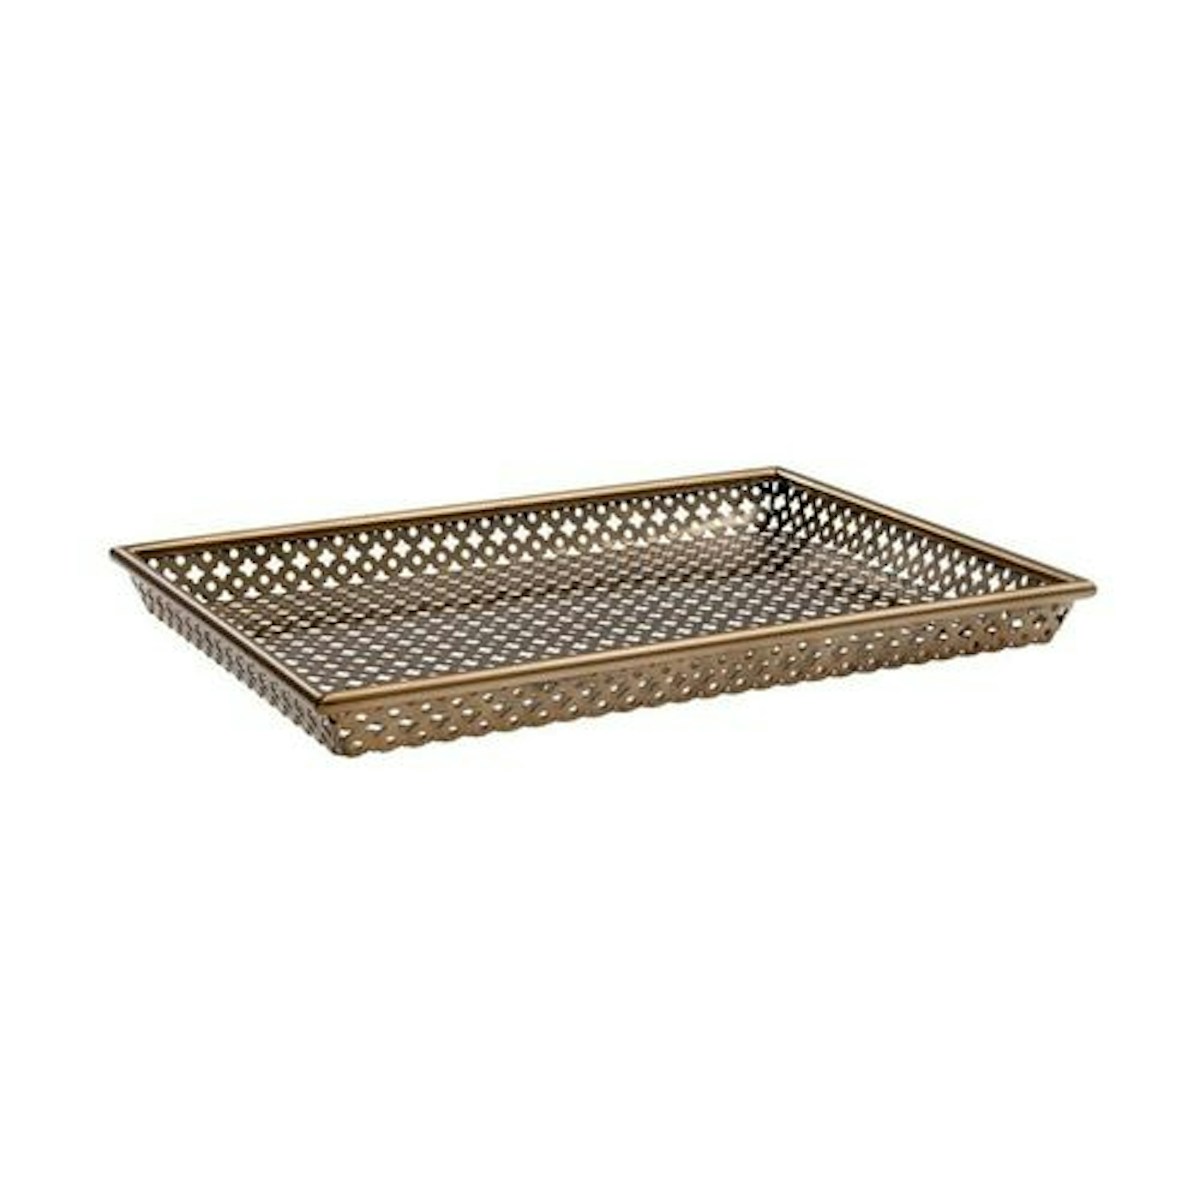 Sirenuse Tray - 21 Best Decorative Trays To Buy For Your Tabletop - LuxDeco.com